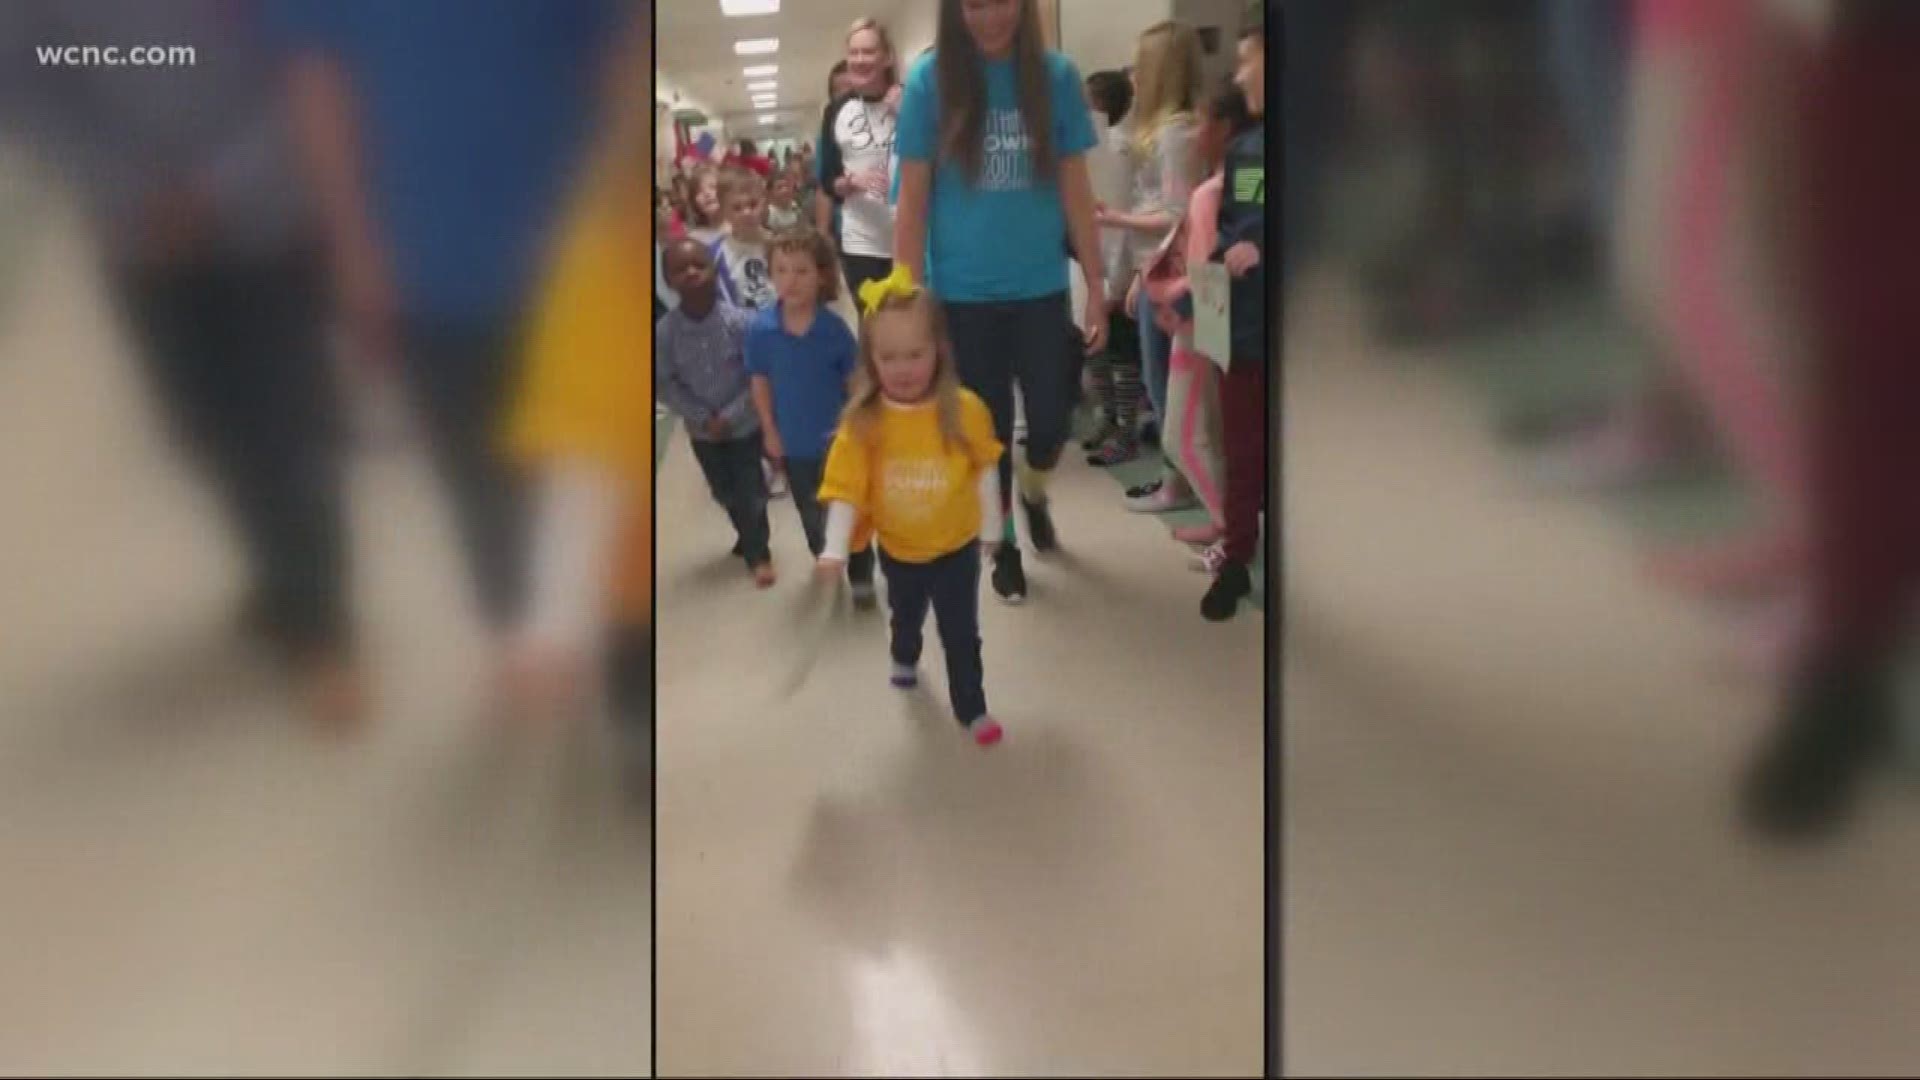 A school wide parade just for her